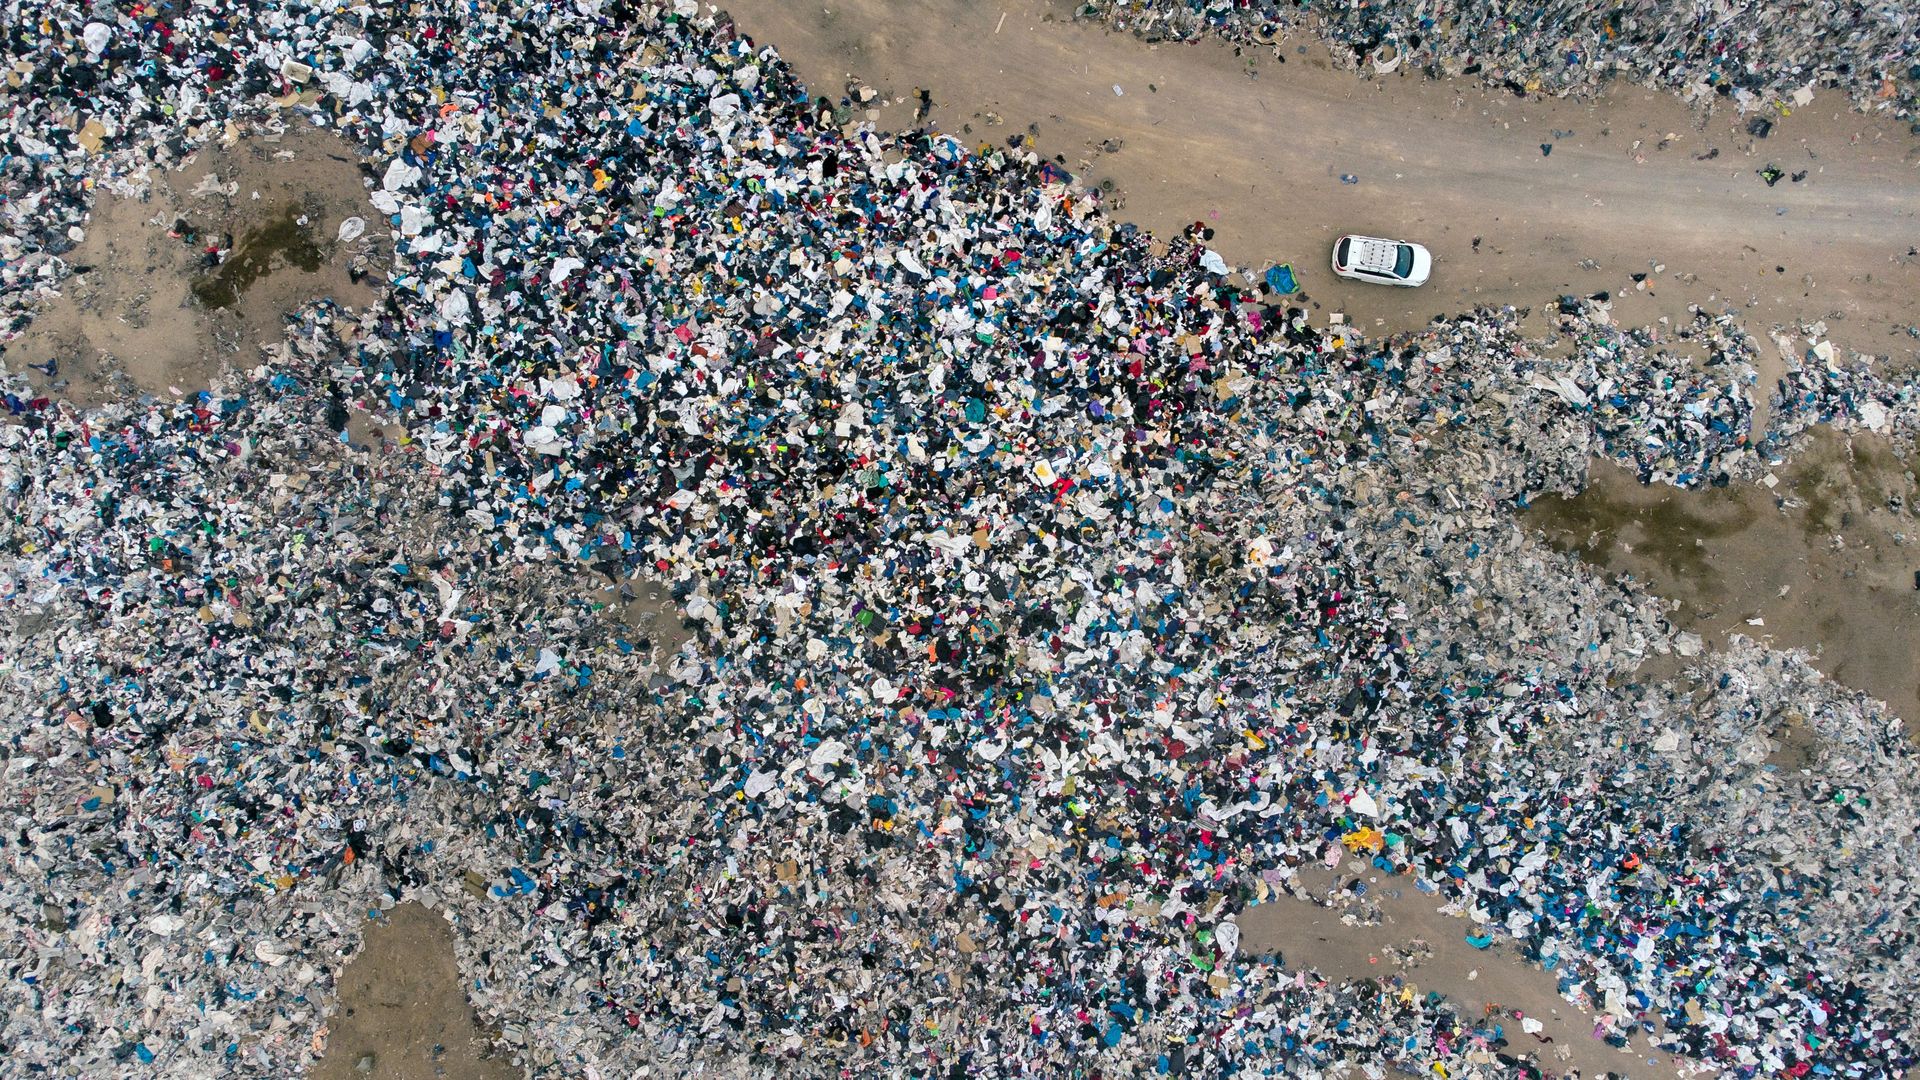 Tons of discarded clothing are piled up on a Chilean desert as a car drives through a dirt road